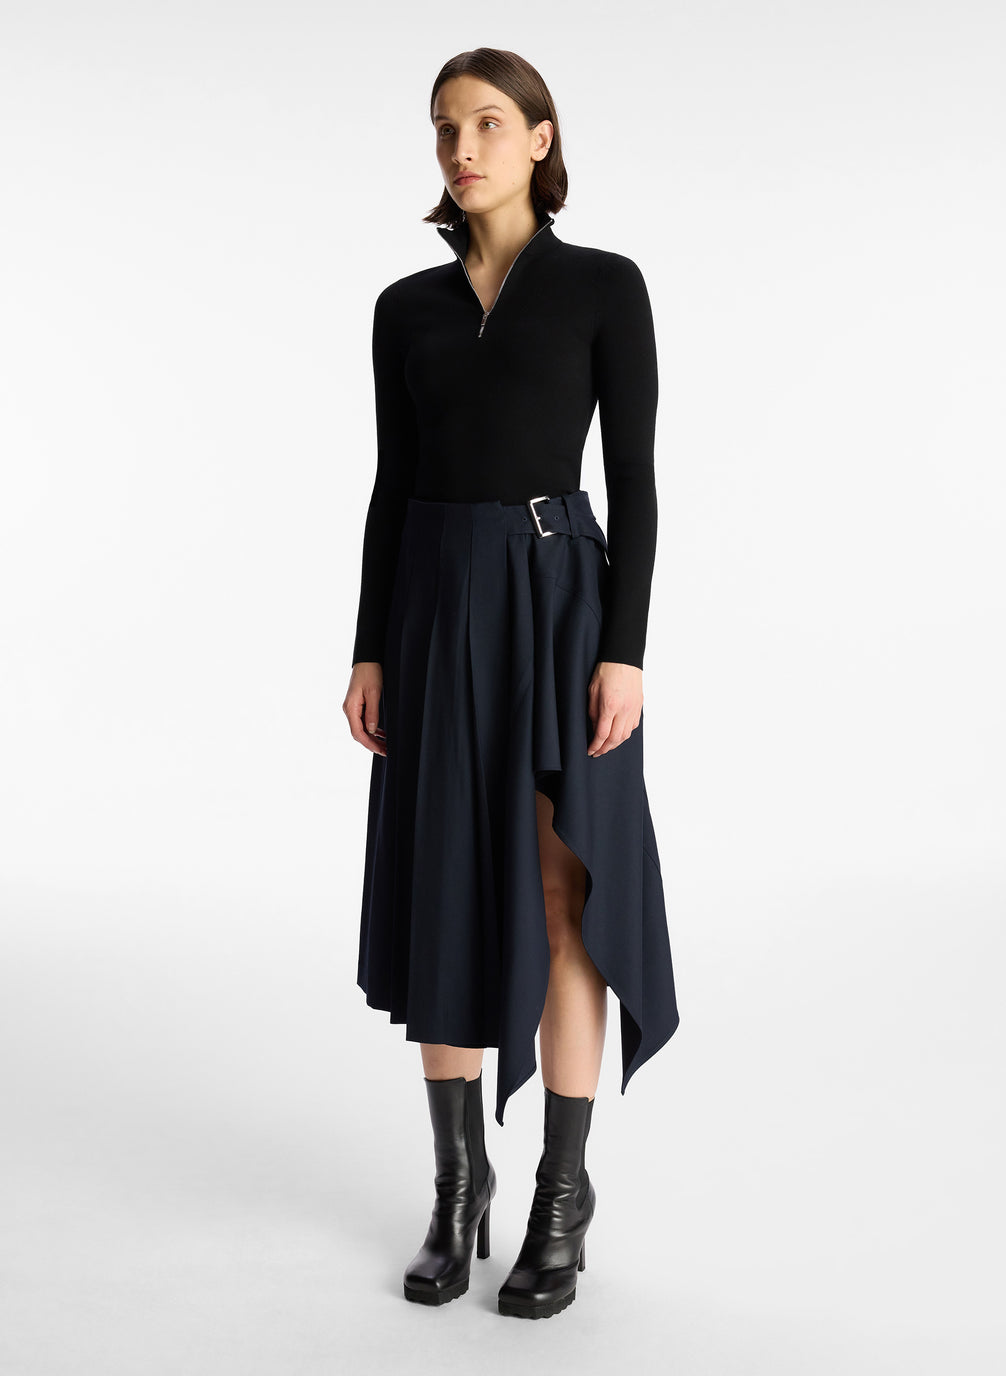 side view of woman in black long sleeve knit top and navy blue pleated skirt